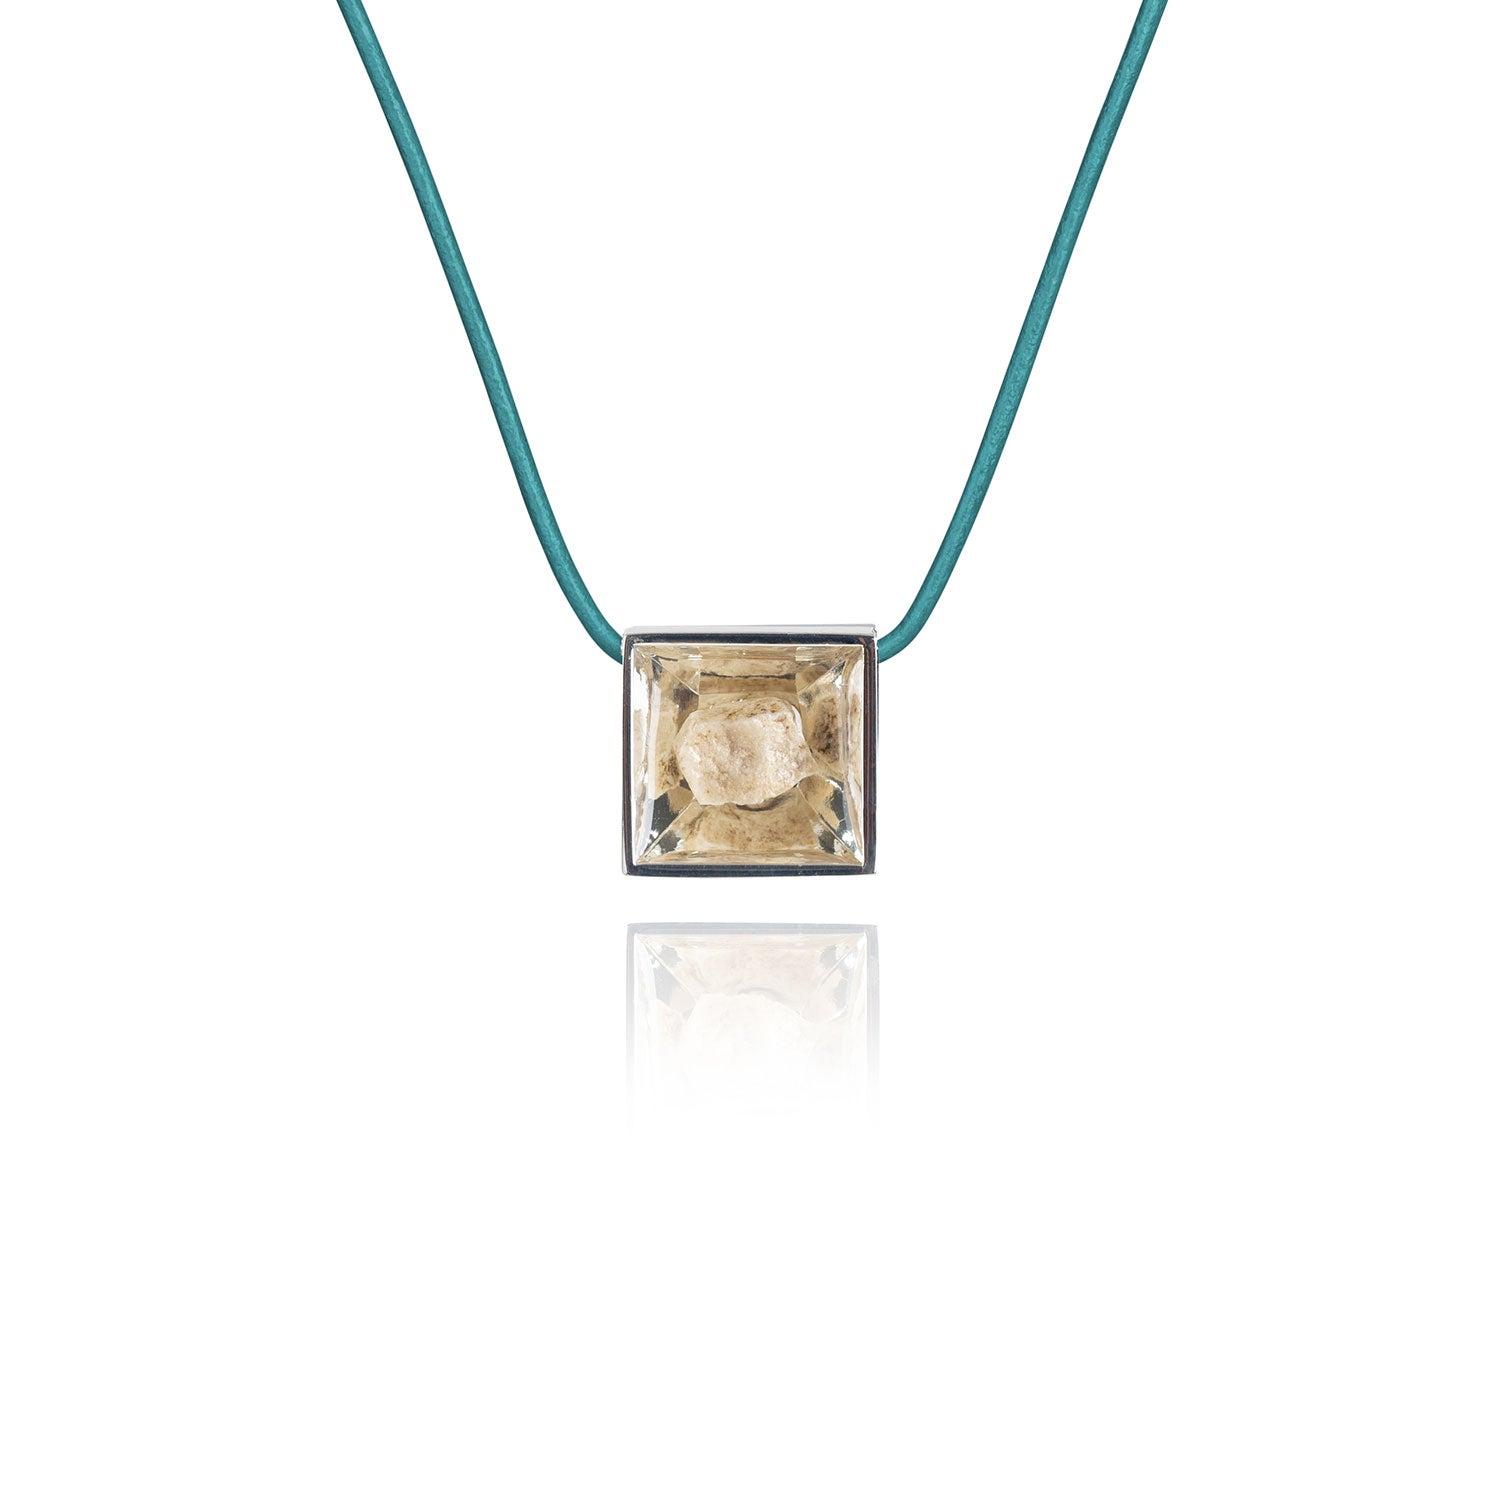 A small natural tan stone sitting in the middle of a square shaped metal pendant in a silver color. The pendant is hanging on a turquoise leather necklace.